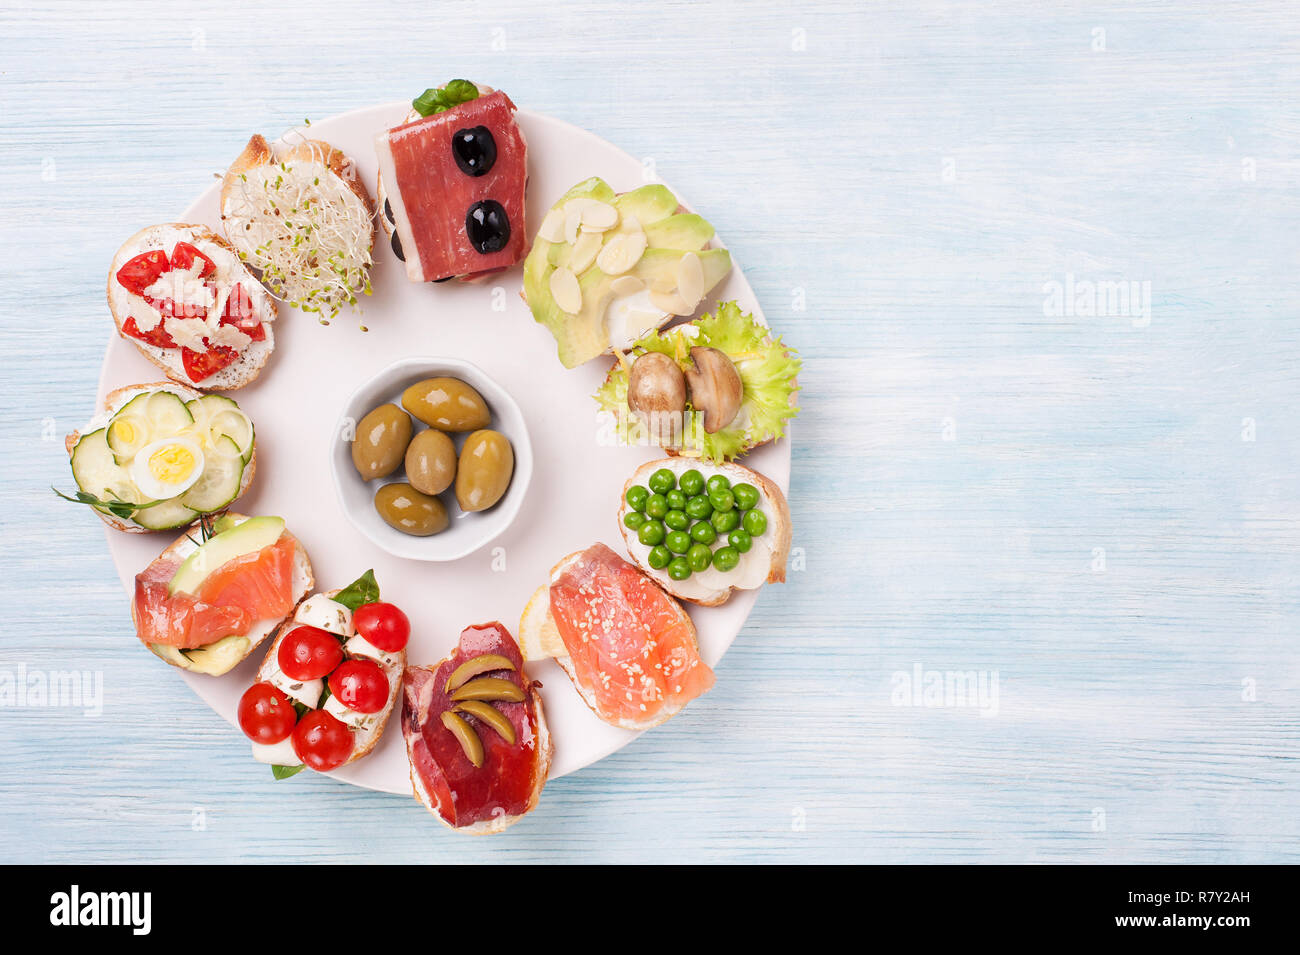 Tasty  canape  with smoked salmon, cucumber,mozzarella, eggs,  mushrooms, olives, avocado, almonds   served on a plate. Stock Photo